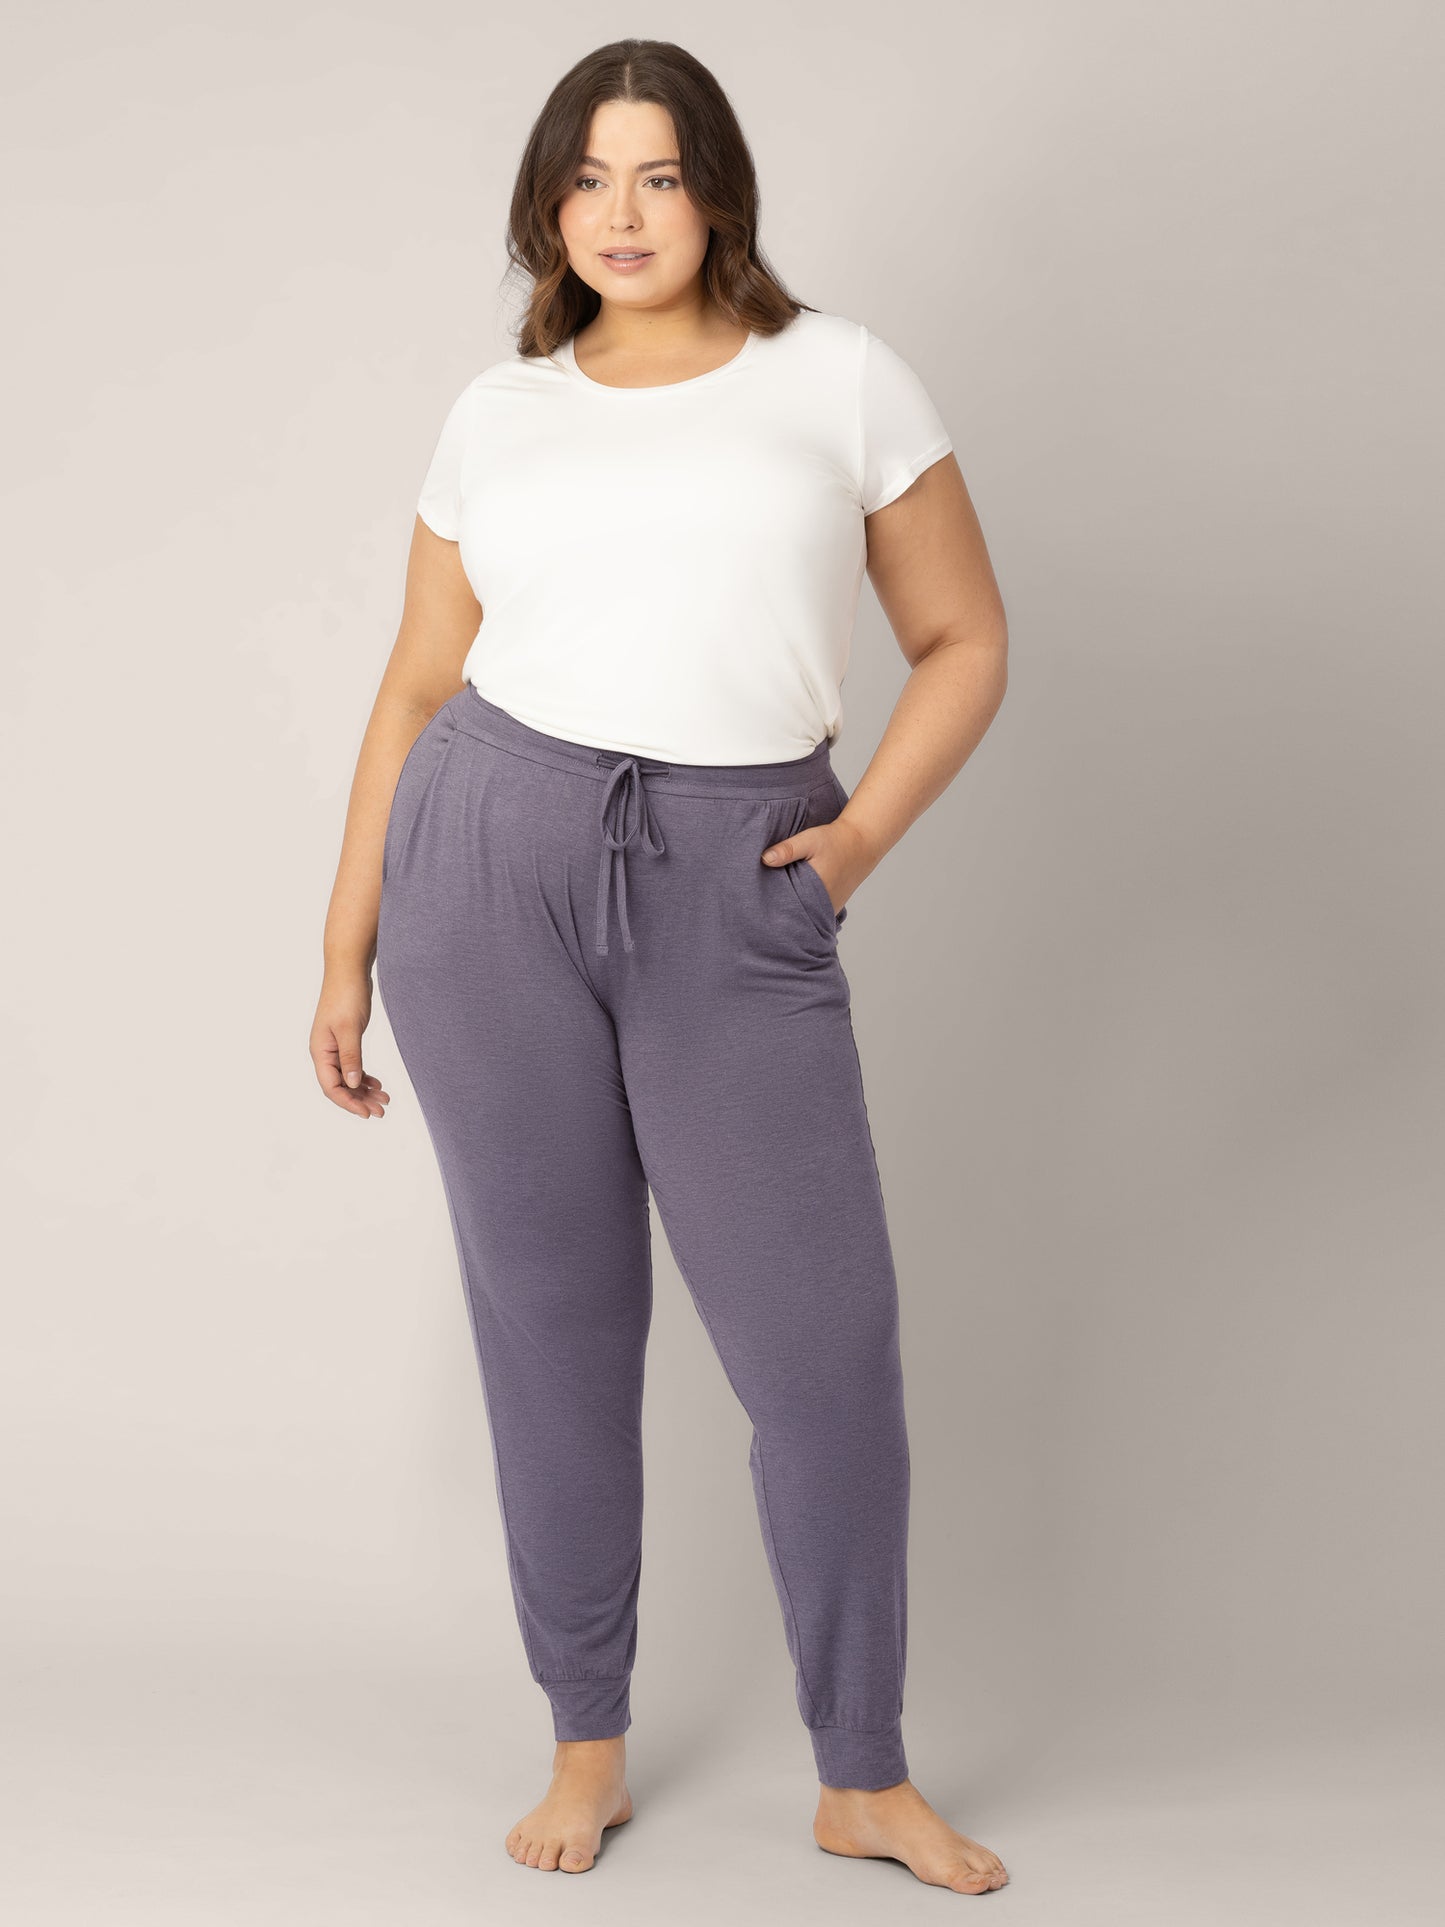 Model with her hand on her hip wearing the Everyday Lounge Jogger in Heathered Granite